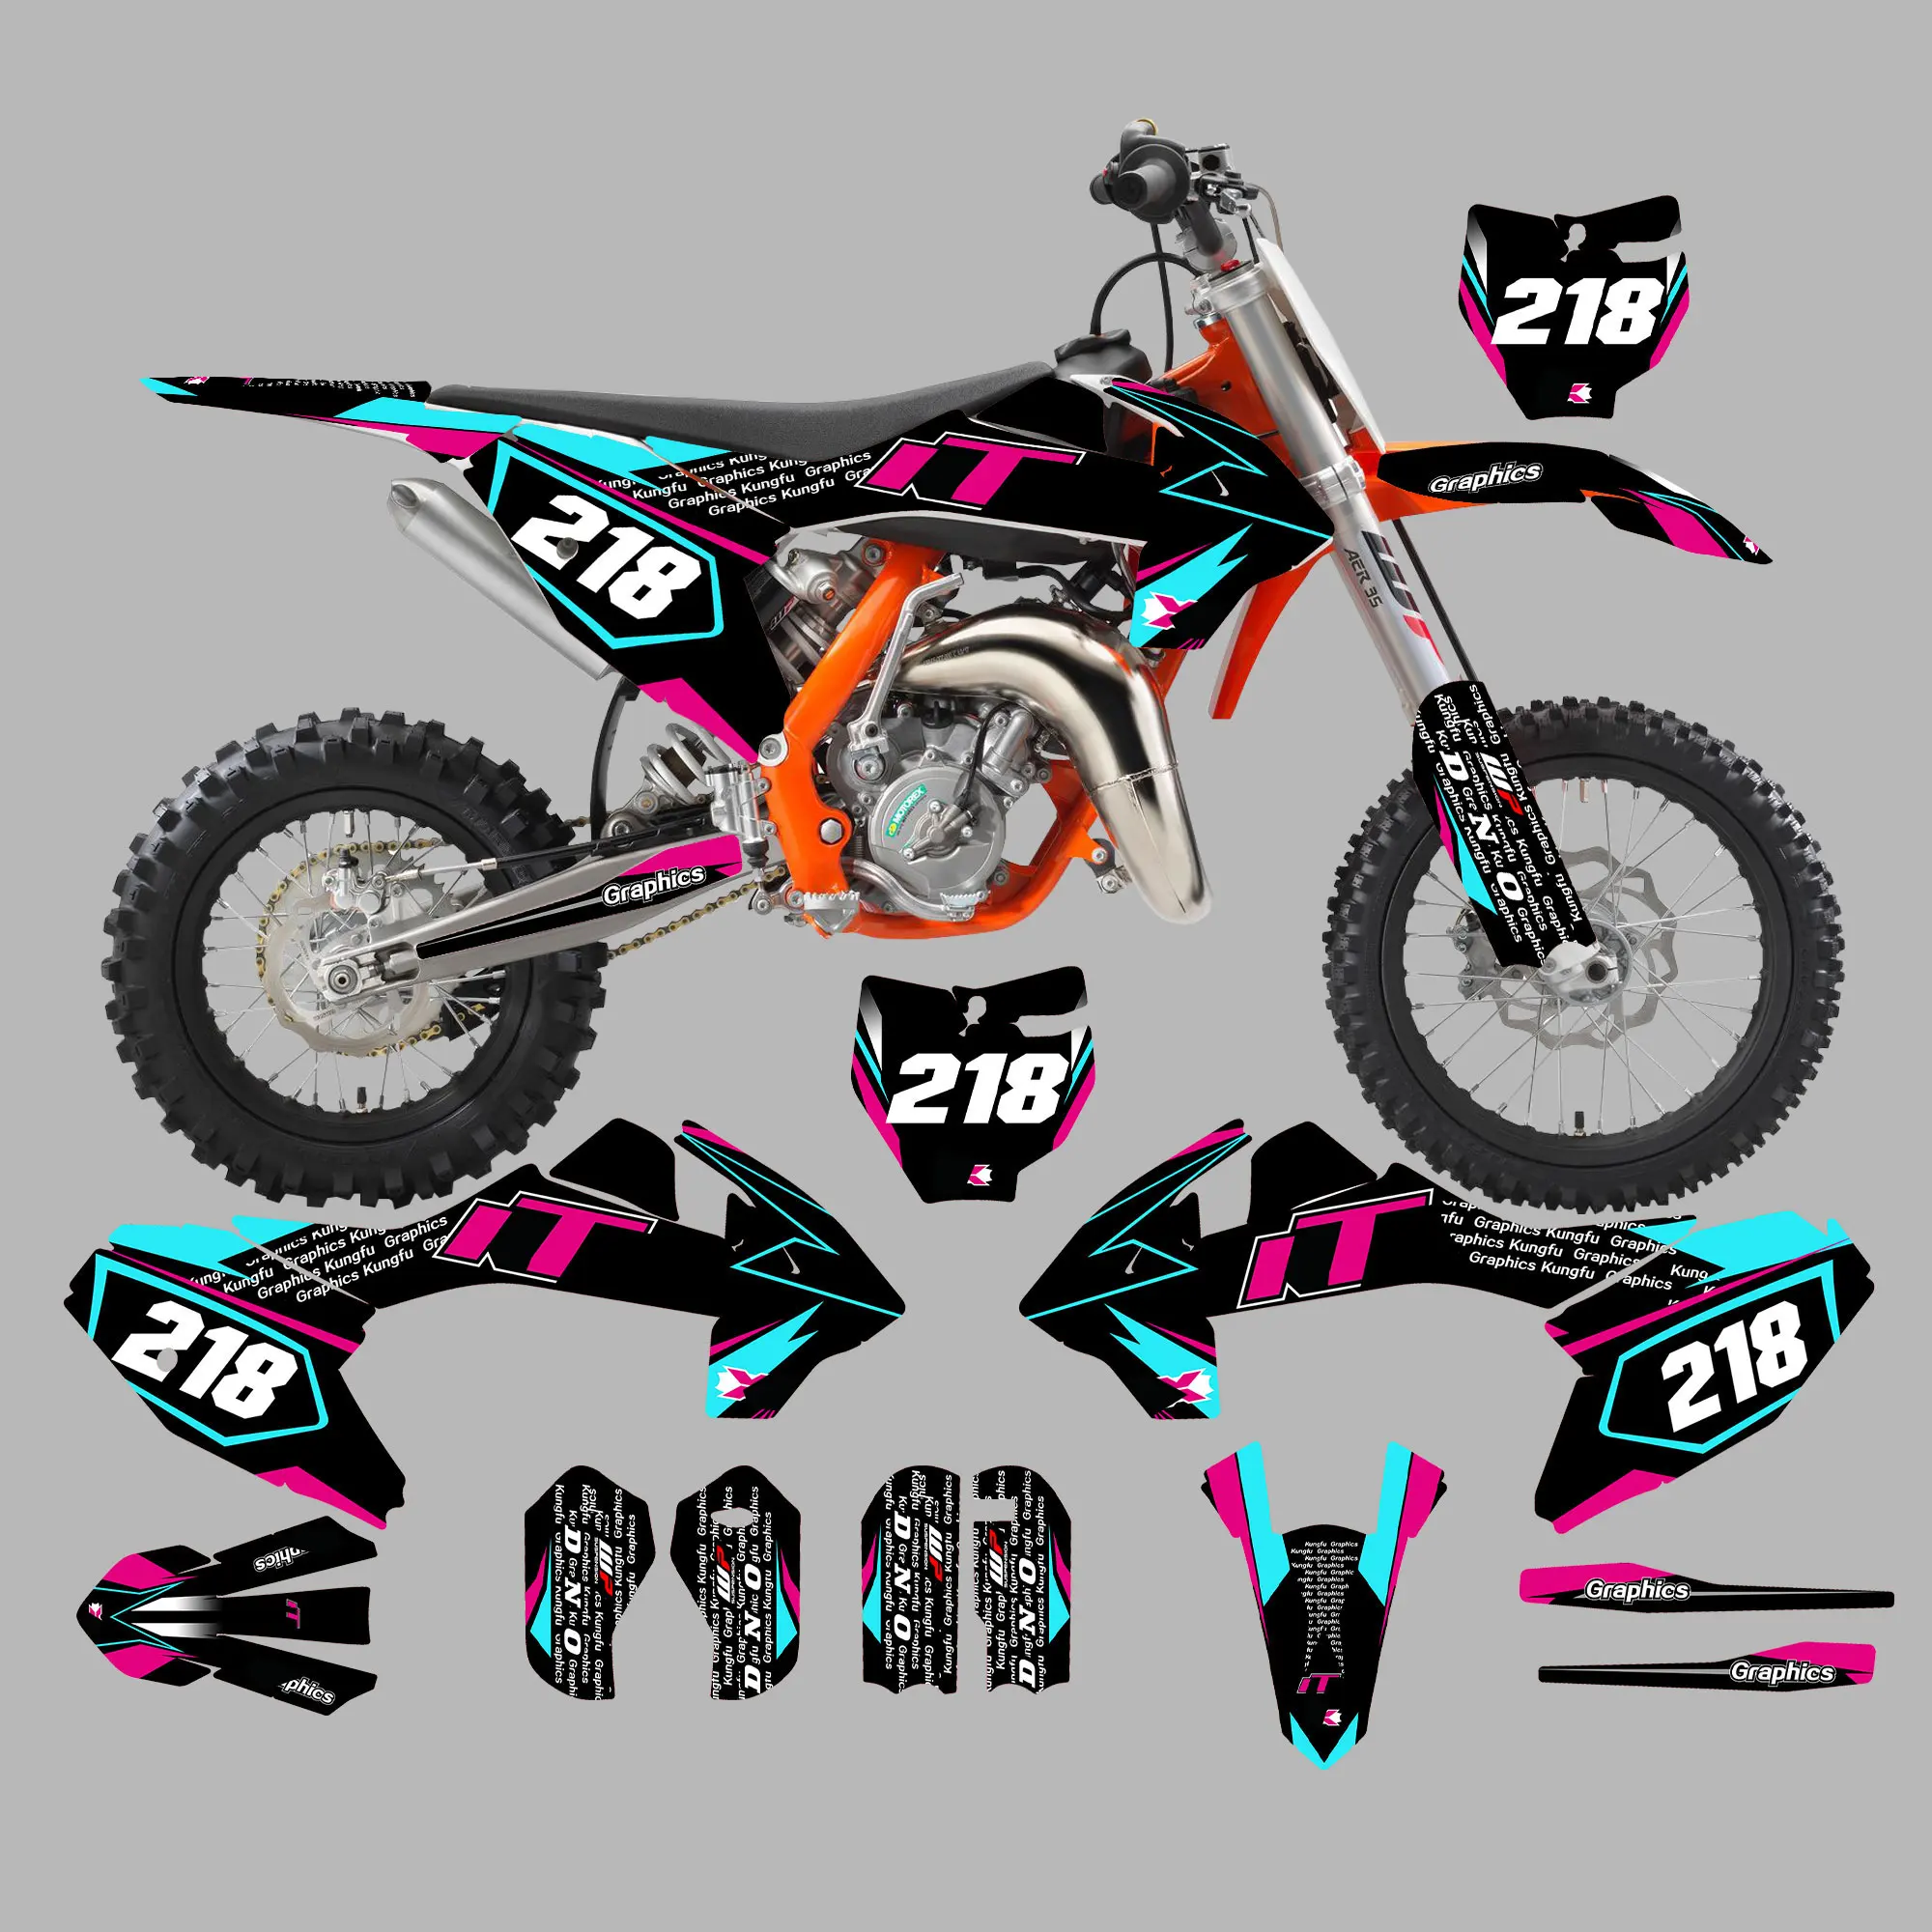 Graphic Kit for 2021 2022 MC65 SX65   2016 2017 2018 2019 2020 2021 2022 SX65  Motocross Decals Sticker graphic kit for 2018 2020crf 250r 2017 2020 crf450r 2017 2018 2019 2020 motocross decals sticker